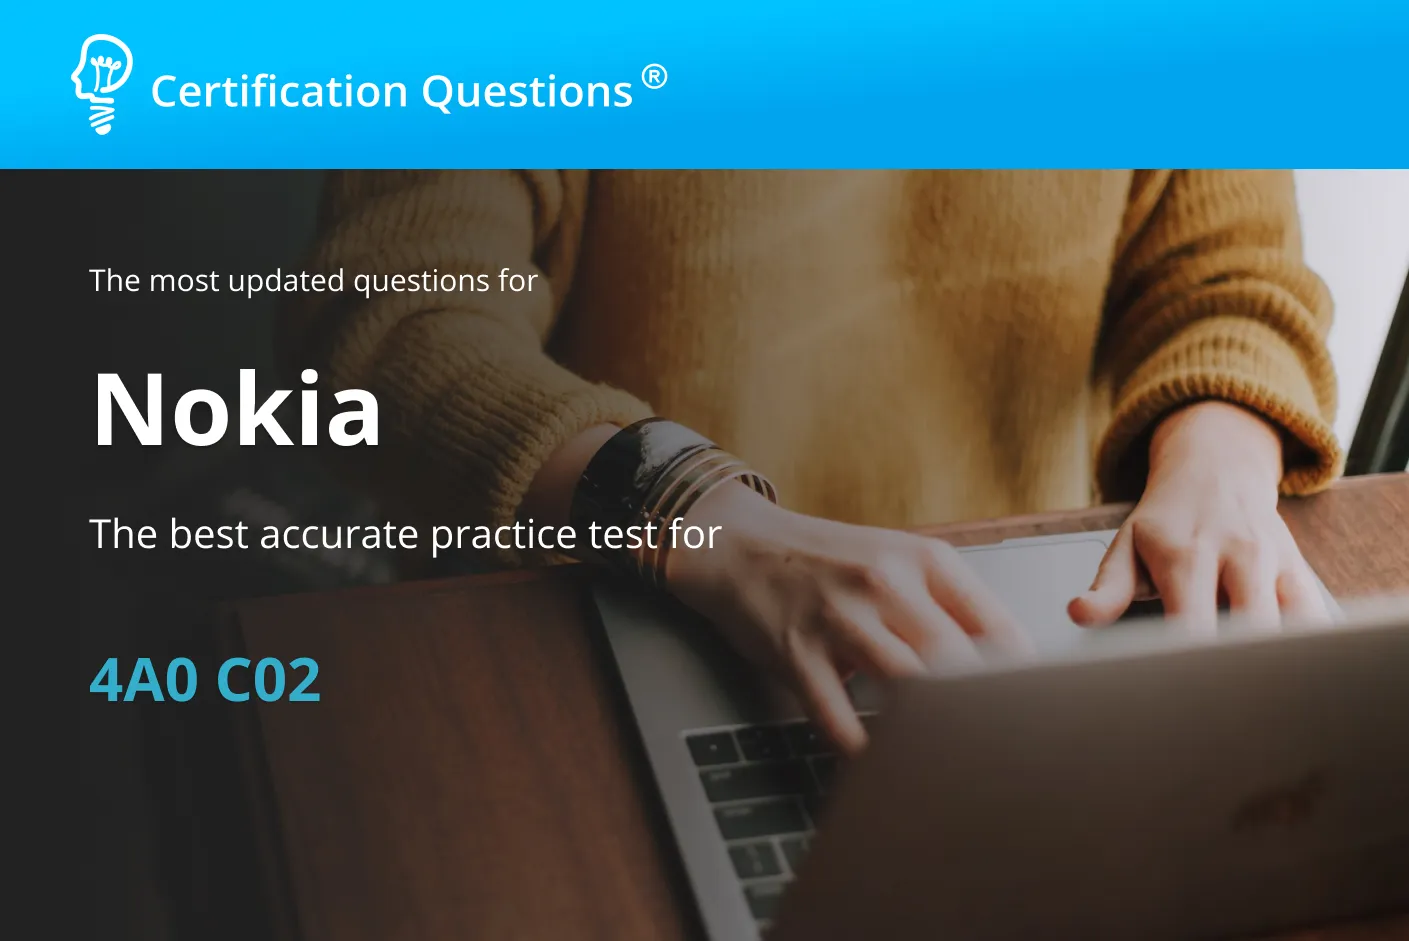 This image represents practice test guide Nokia SRA Composite